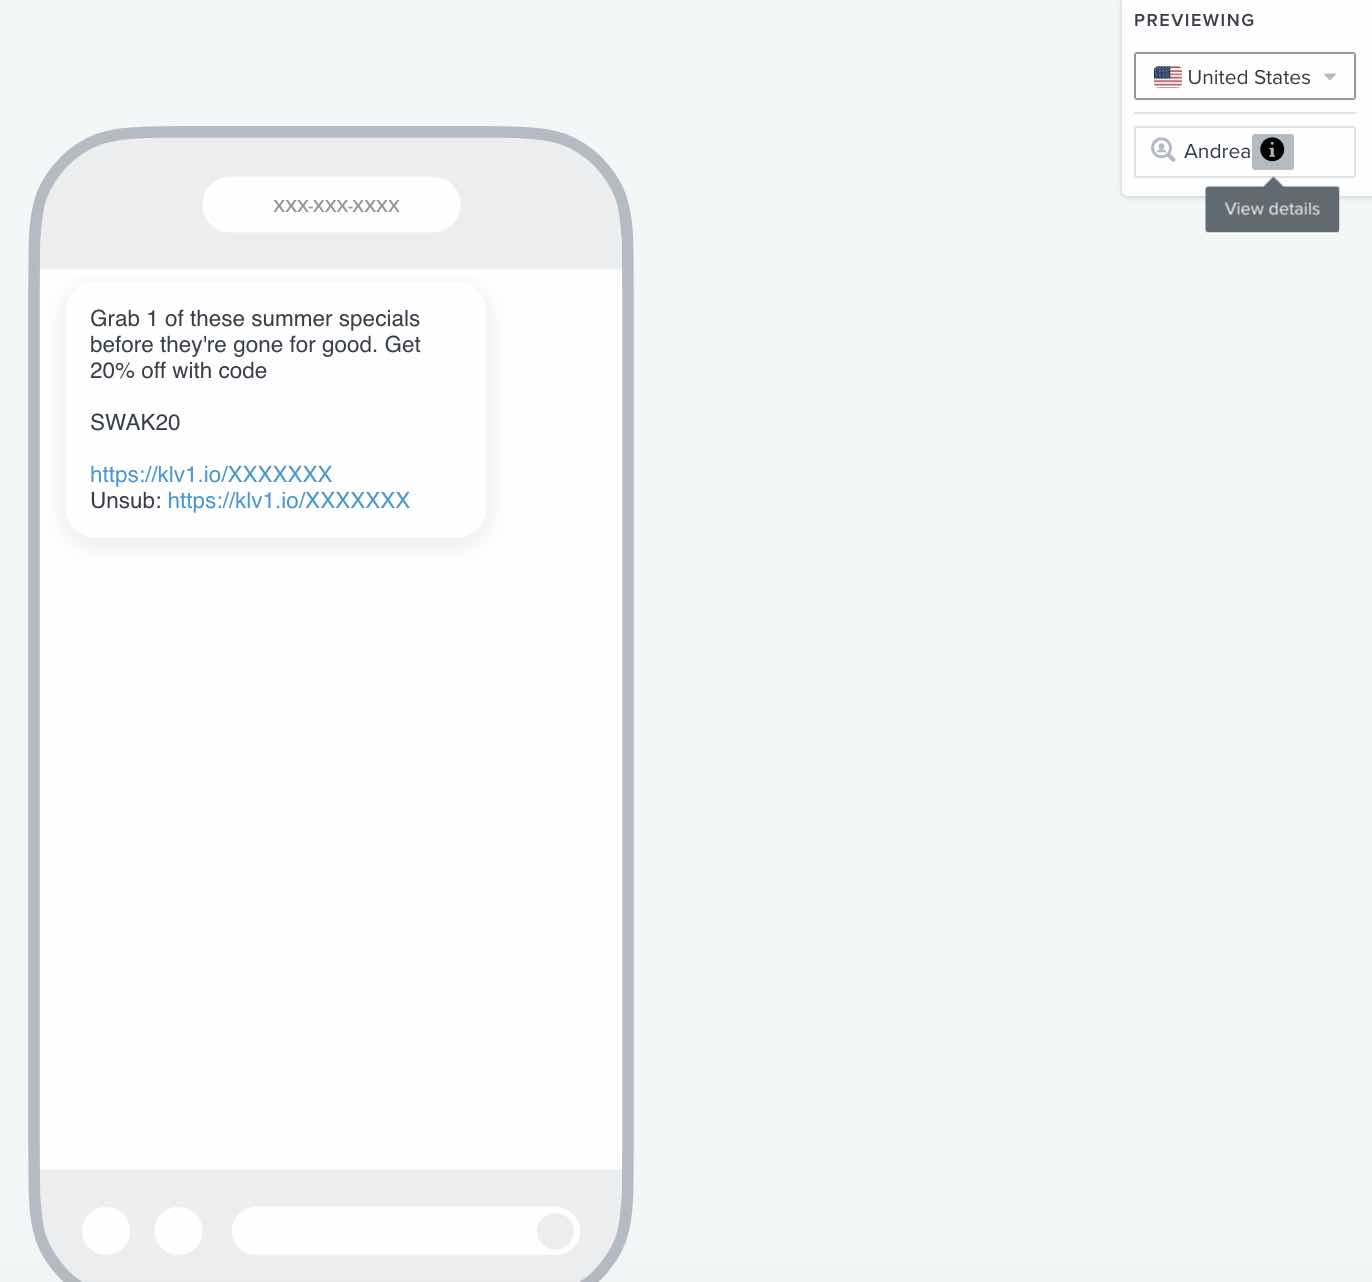 The Previewing box for an SMS, which includes the View Details button